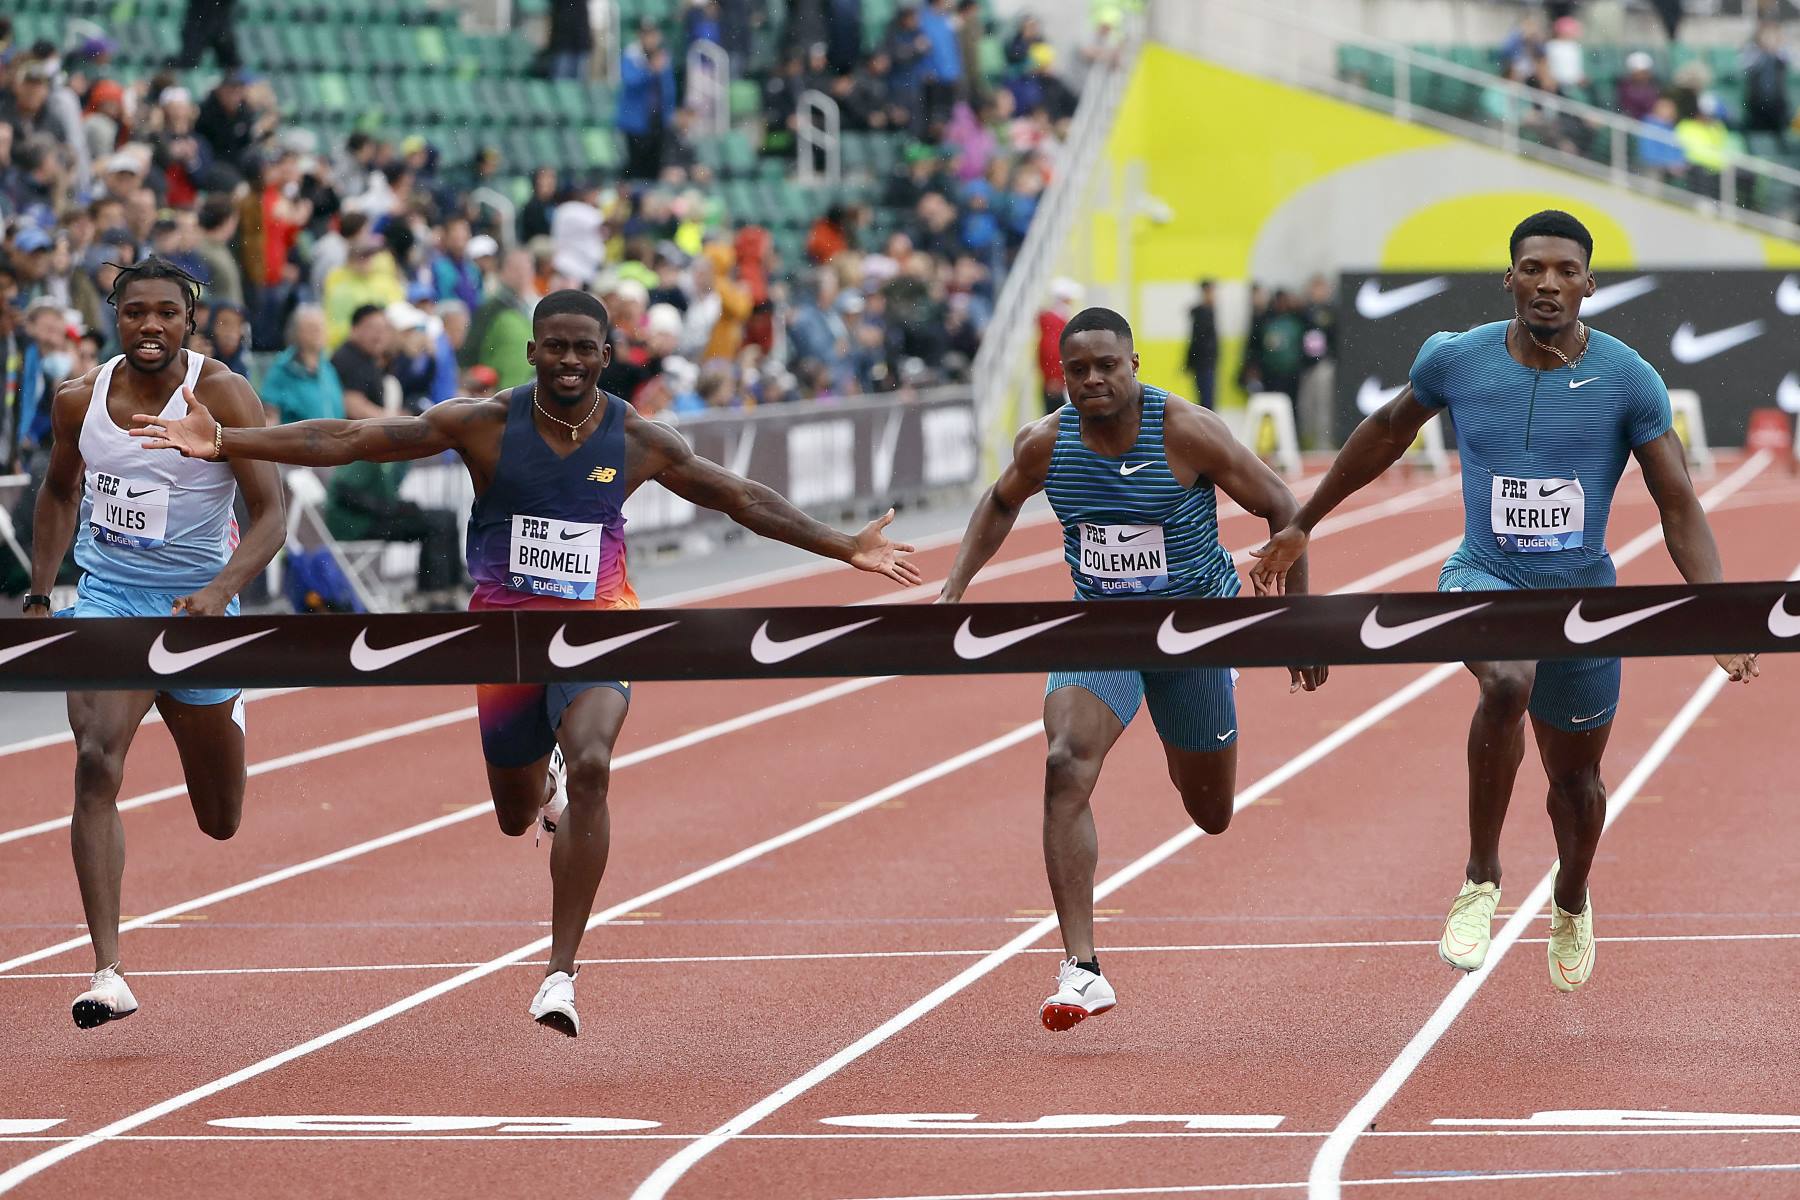 How To Watch World Championships Track And Field